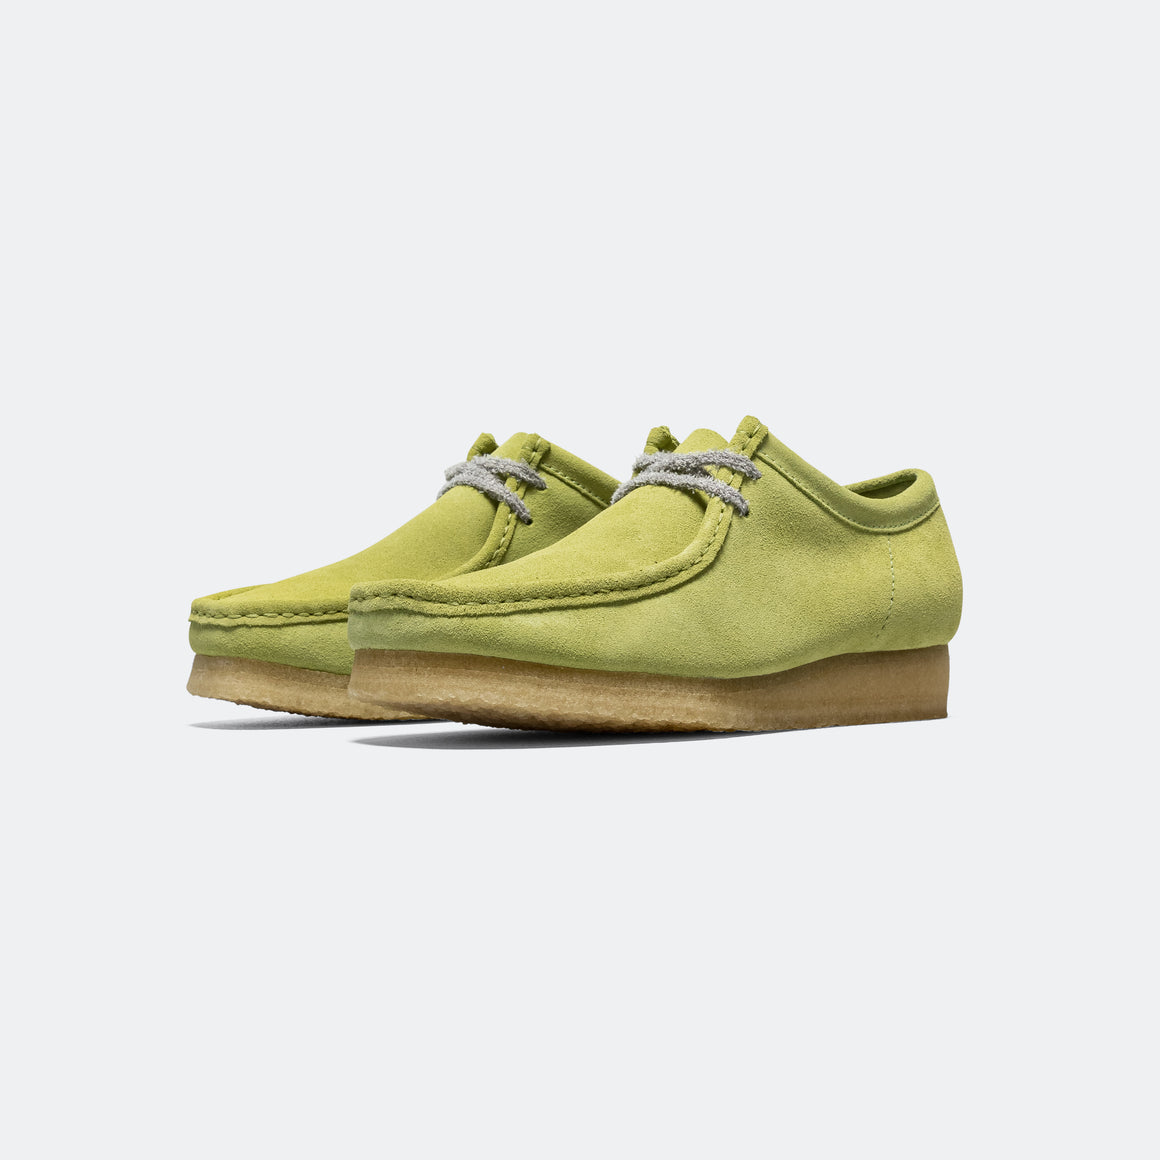 Clarks - Wallabee - Pale Lime Suede - UP THERE